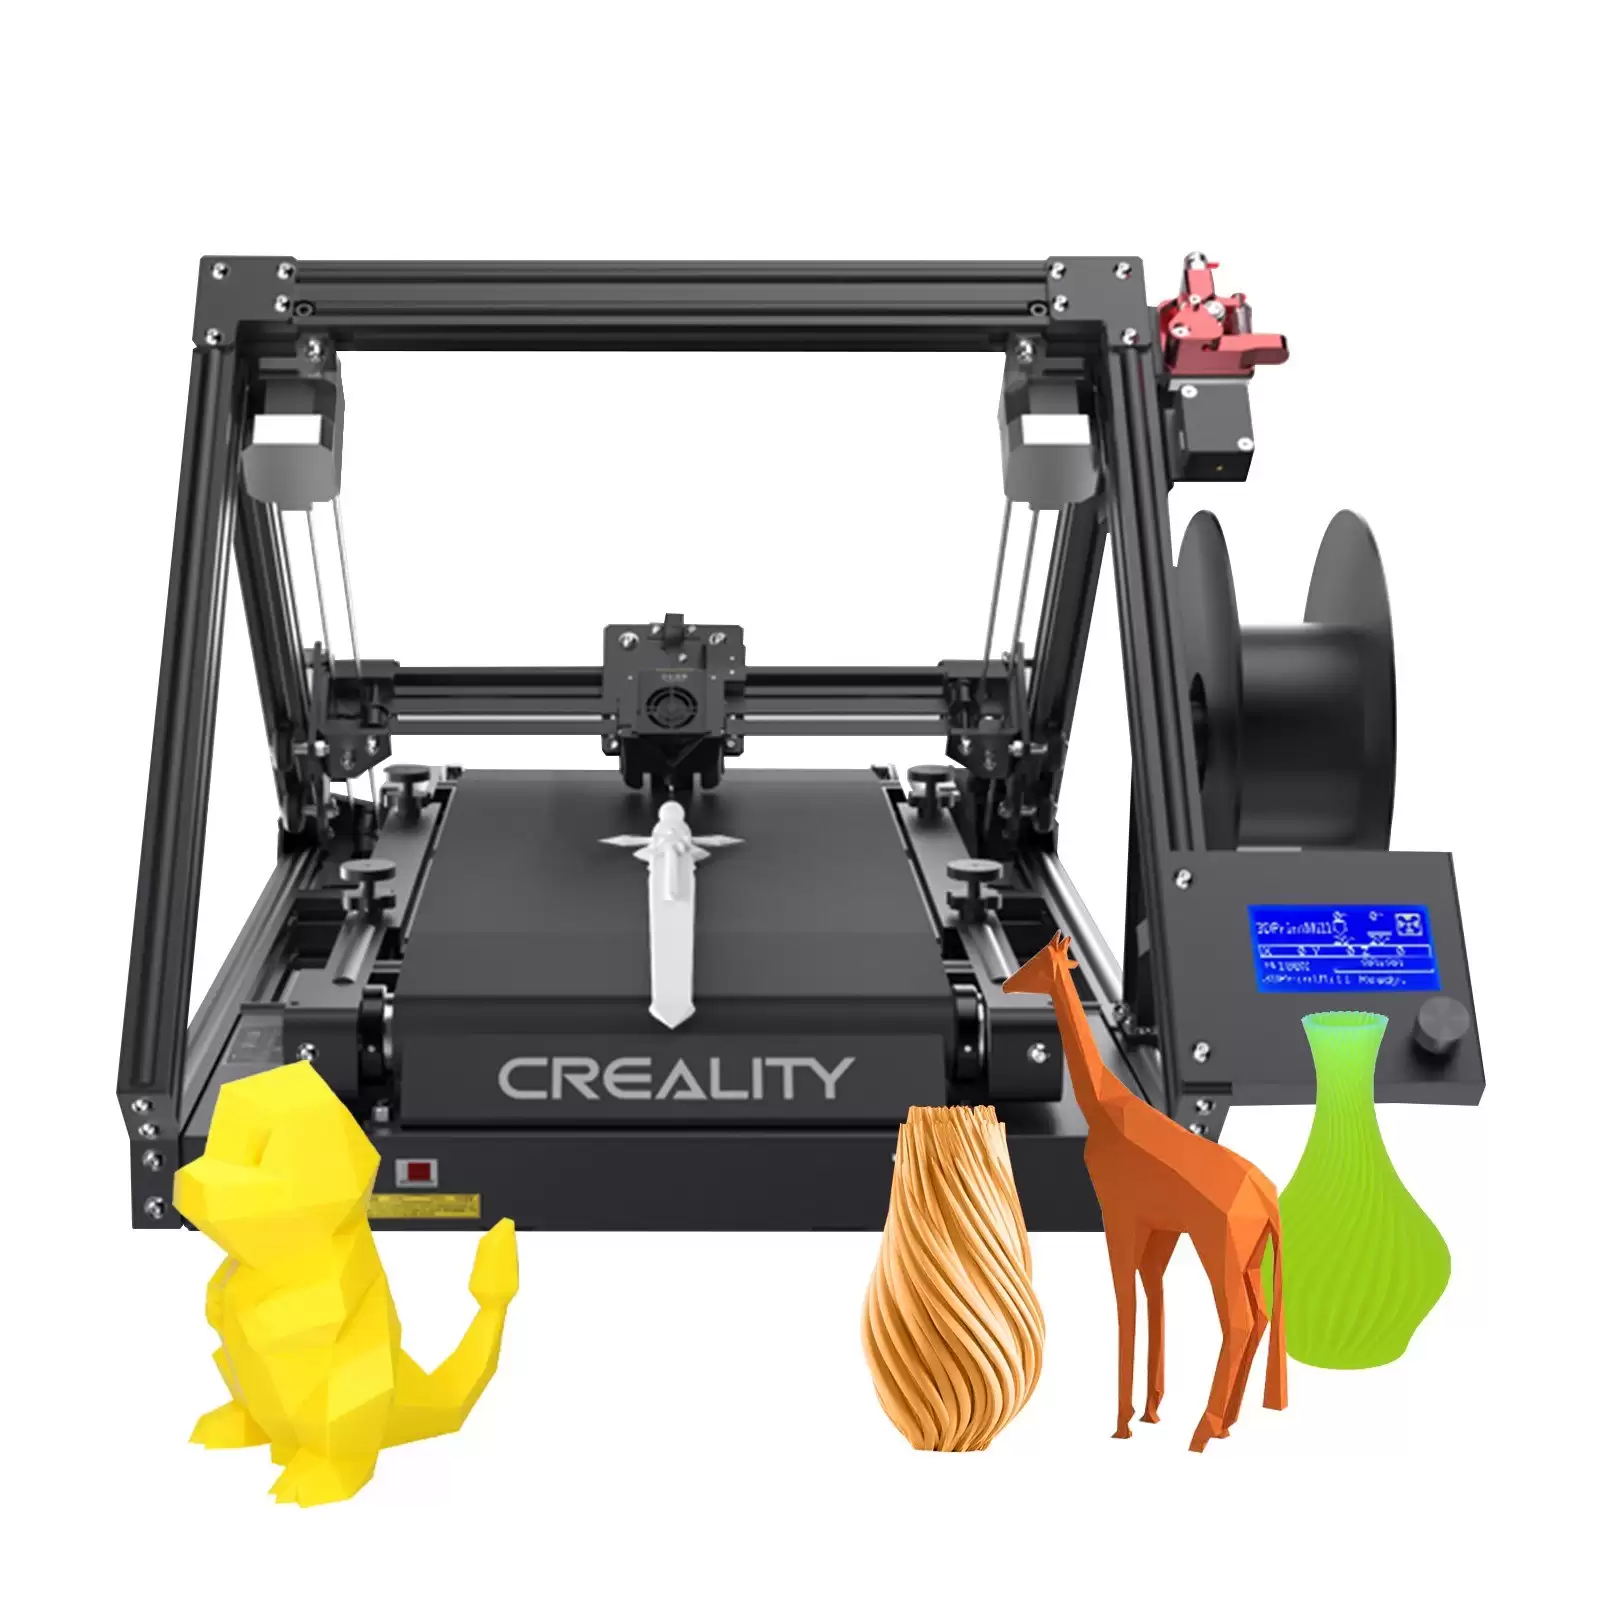 Get Extra $350 Discount On Original Creality Cr-30 3dprintmill 3d Printer, Free Shipping $699 (Inclusive Of Vat) At Tomtop